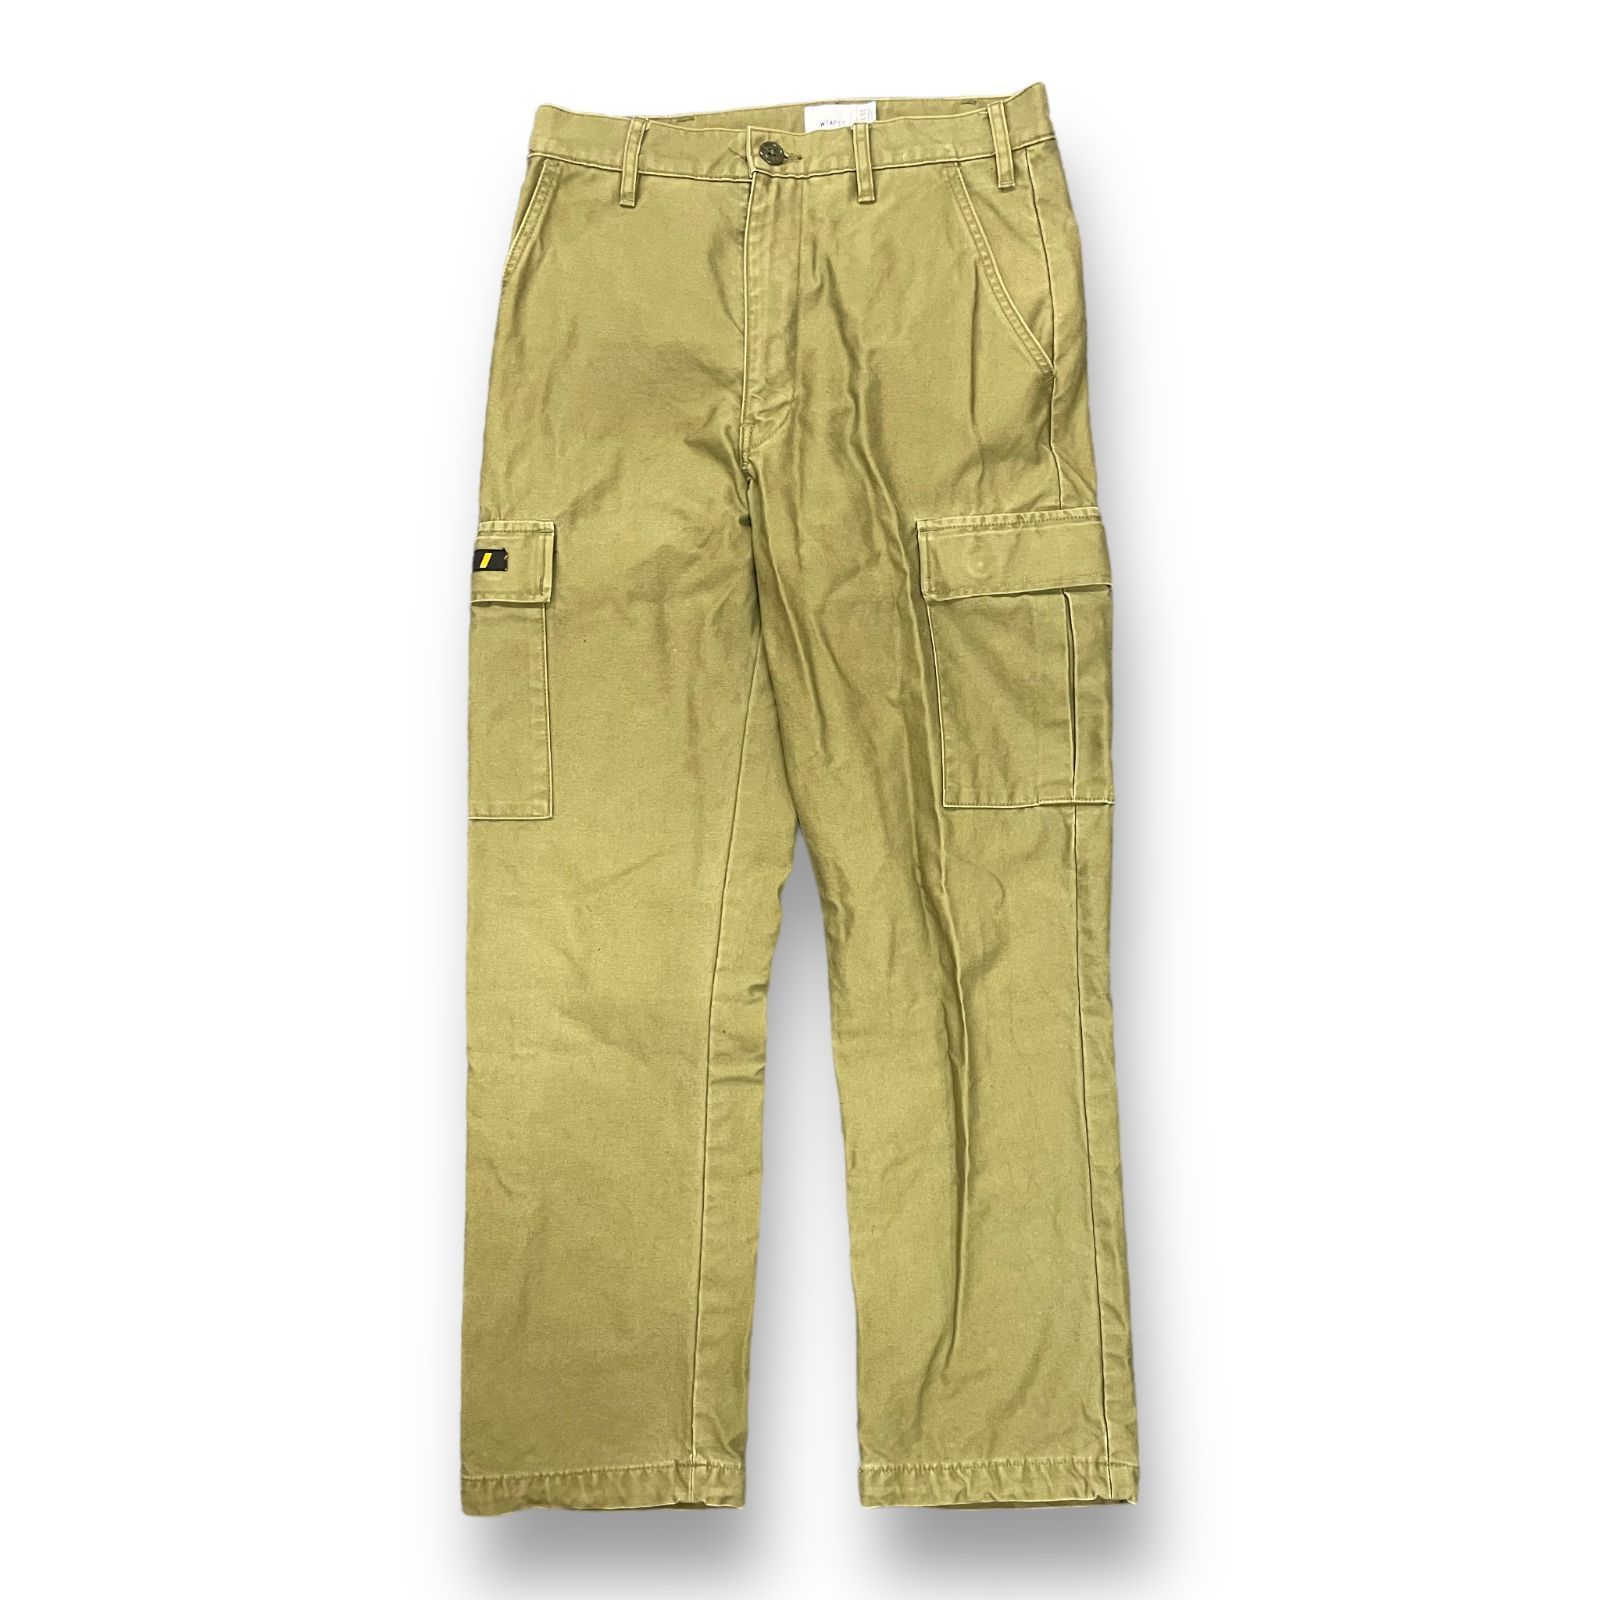 WTAPS 20SS JUNGLE STOCK 01 TROUSERS ジャングルストック カーゴパンツ ダブルタップス 201WVDT-PTM03  01 54169A